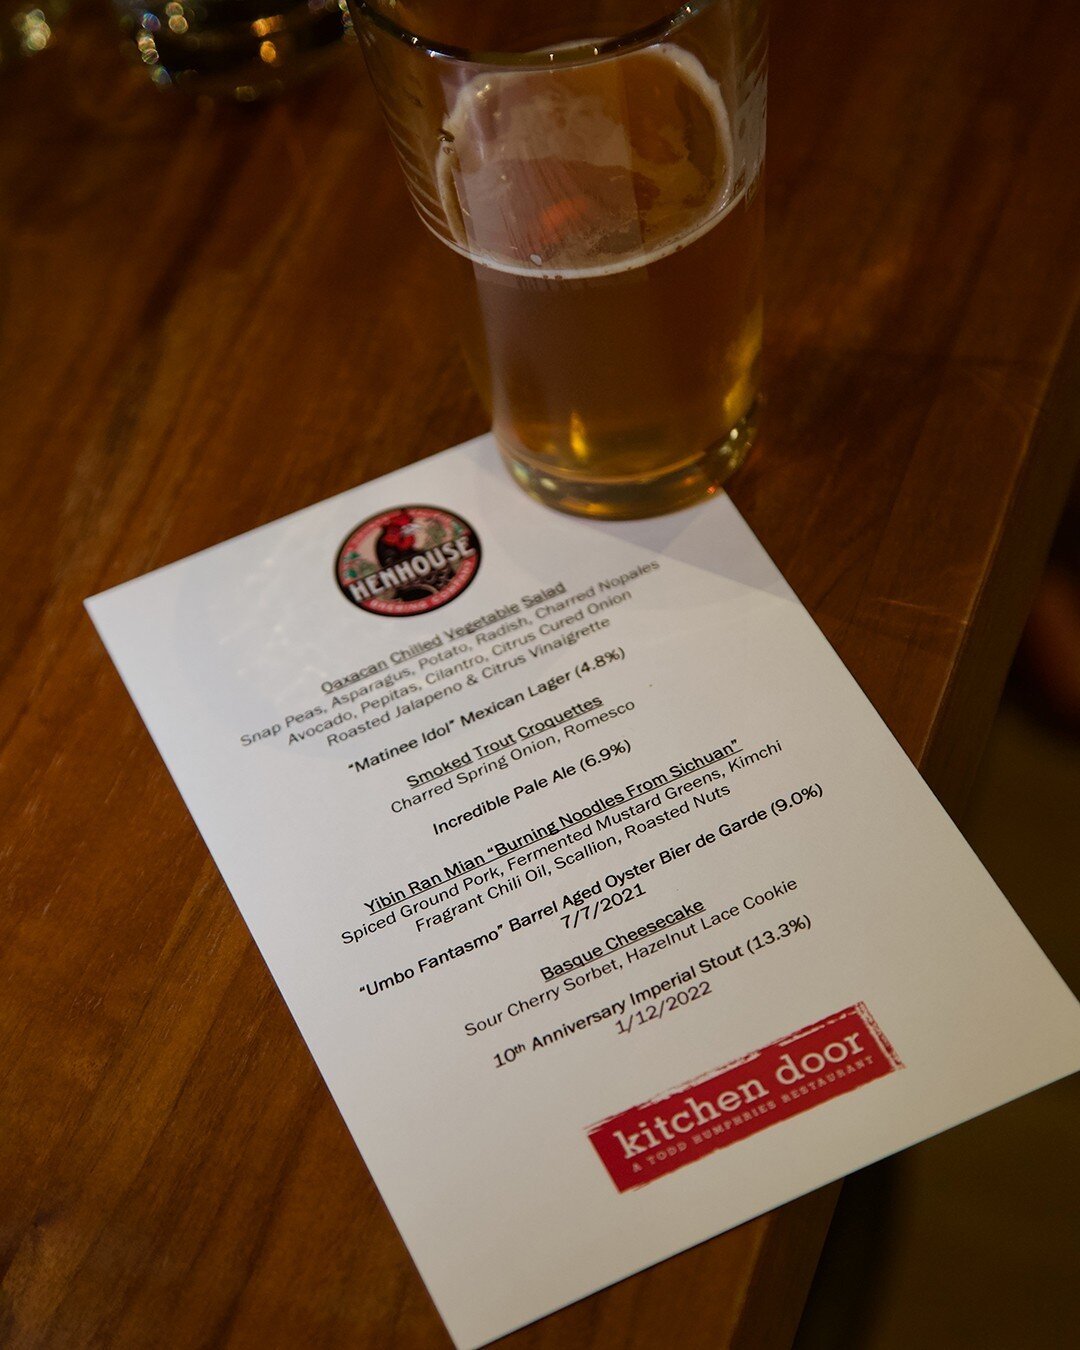 A big thank you to Henhouse Brewing for making the first Spring Craft Beer Dinner an outstanding success! Your excellent beers, such as Big Chirps and Big Chicken Double IPA, perfectly complemented our 5-course menu. We are grateful for the opportuni